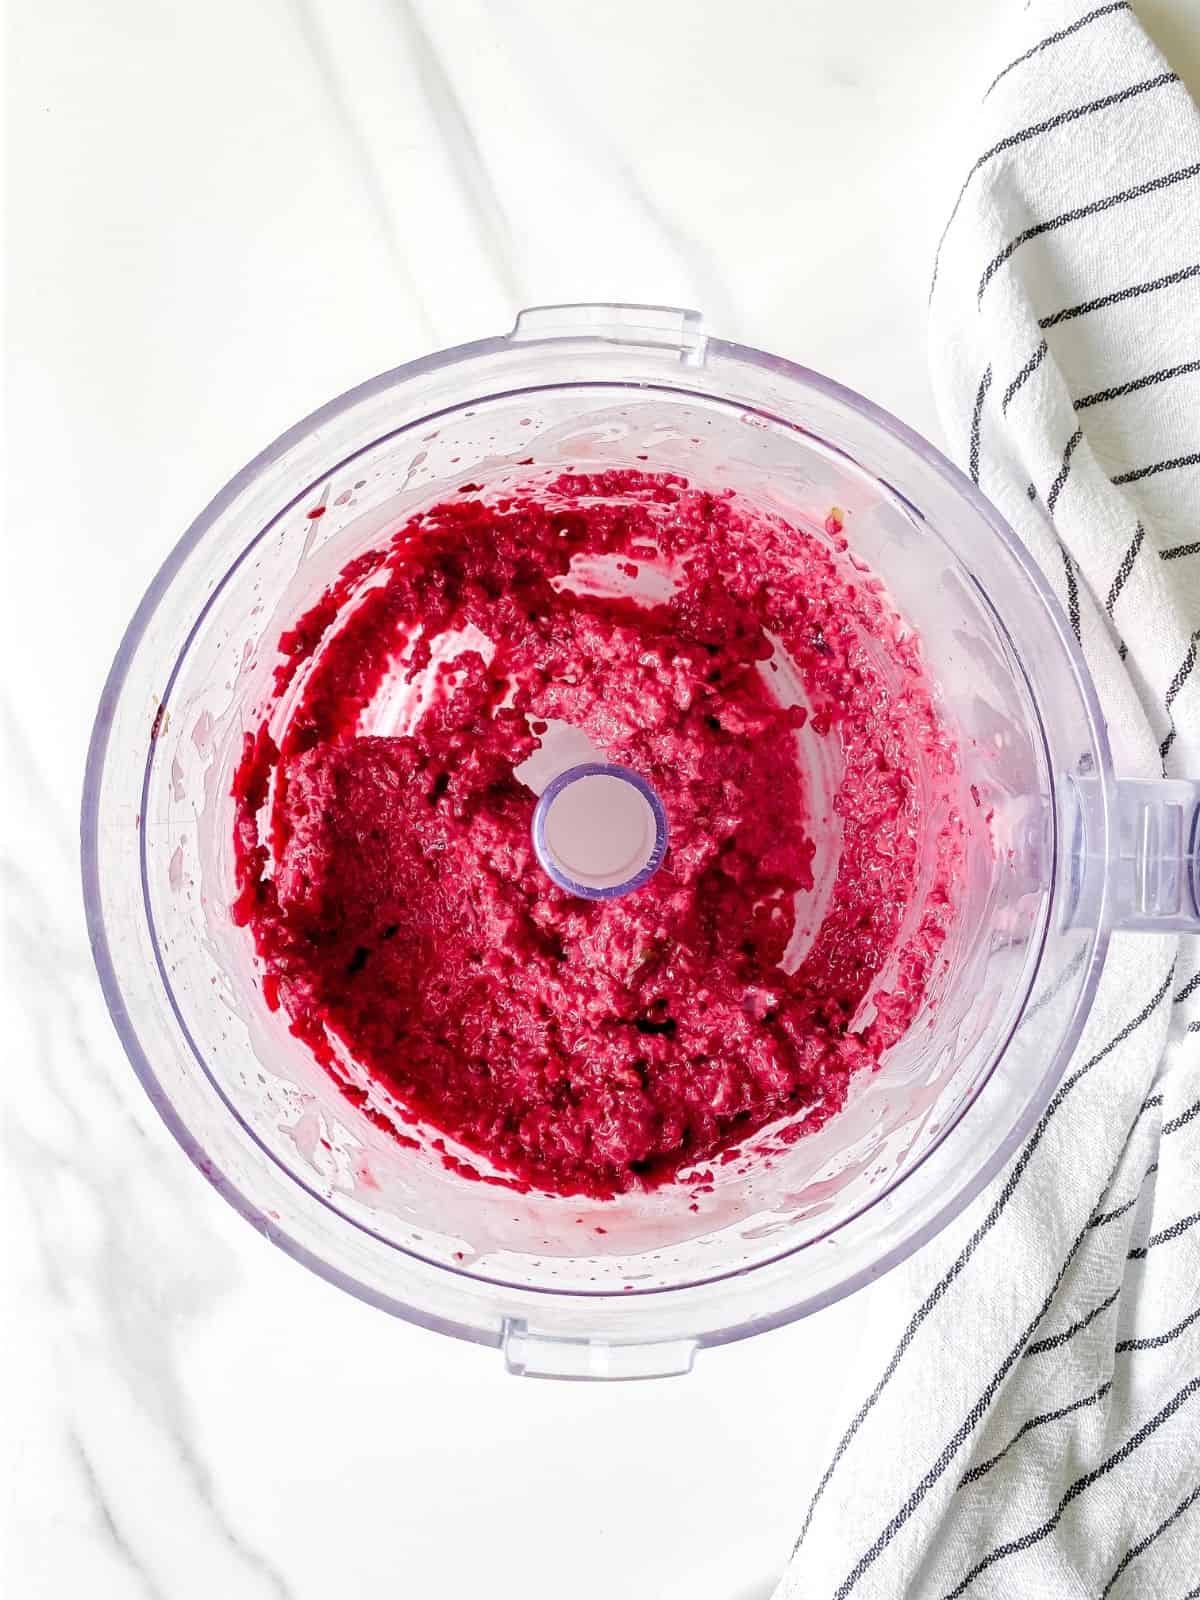 blended beets in a blender next to a white and black striped cloth.